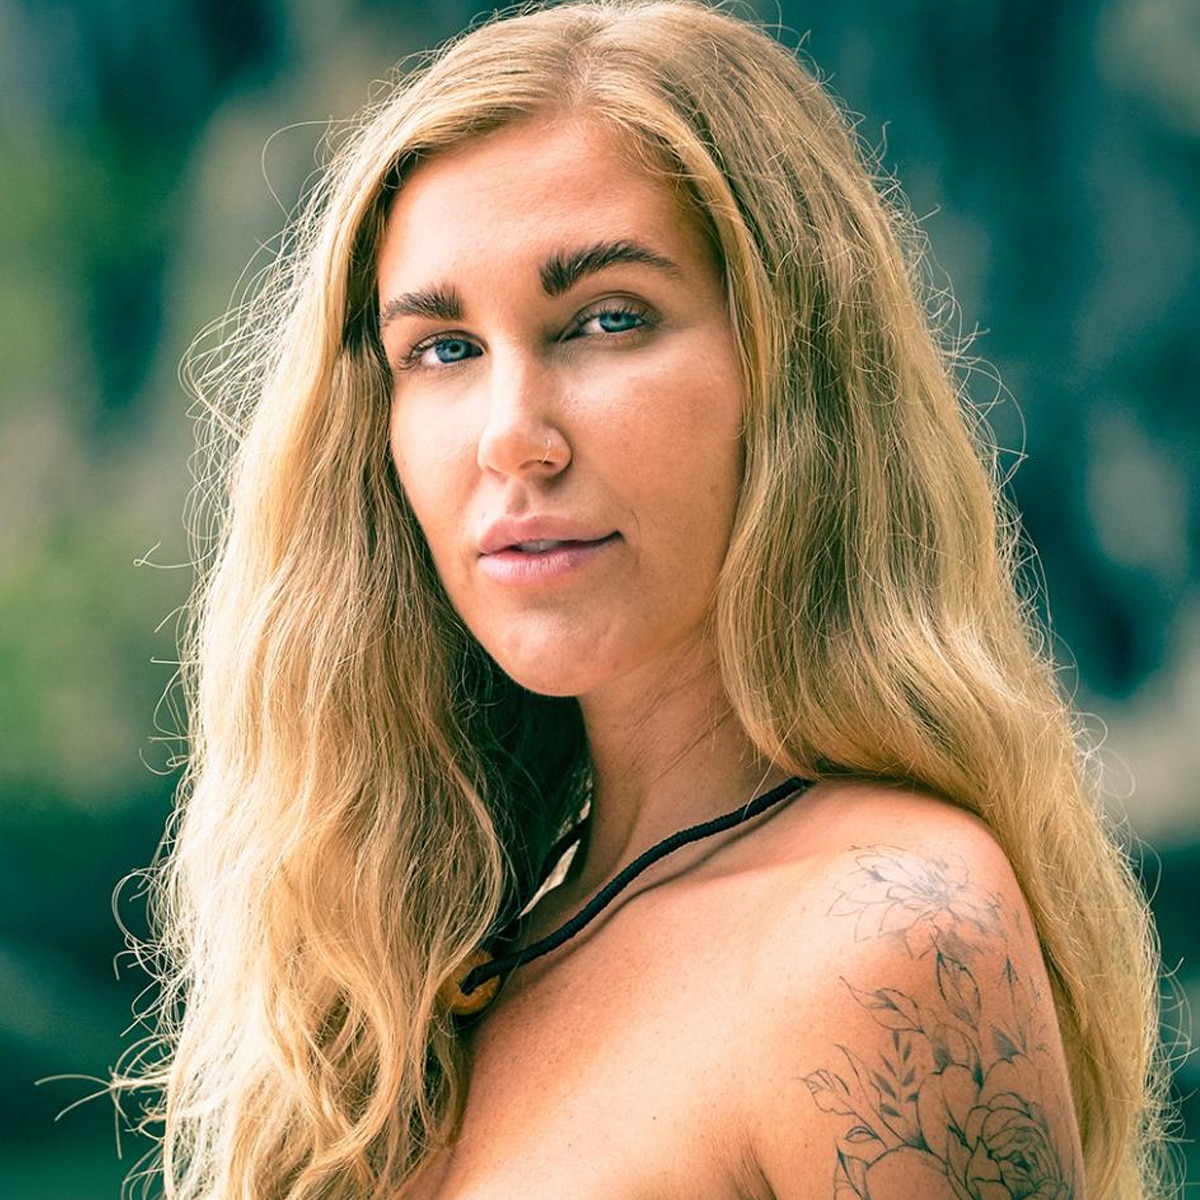 amy molnar add photo hottest women on naked and afraid